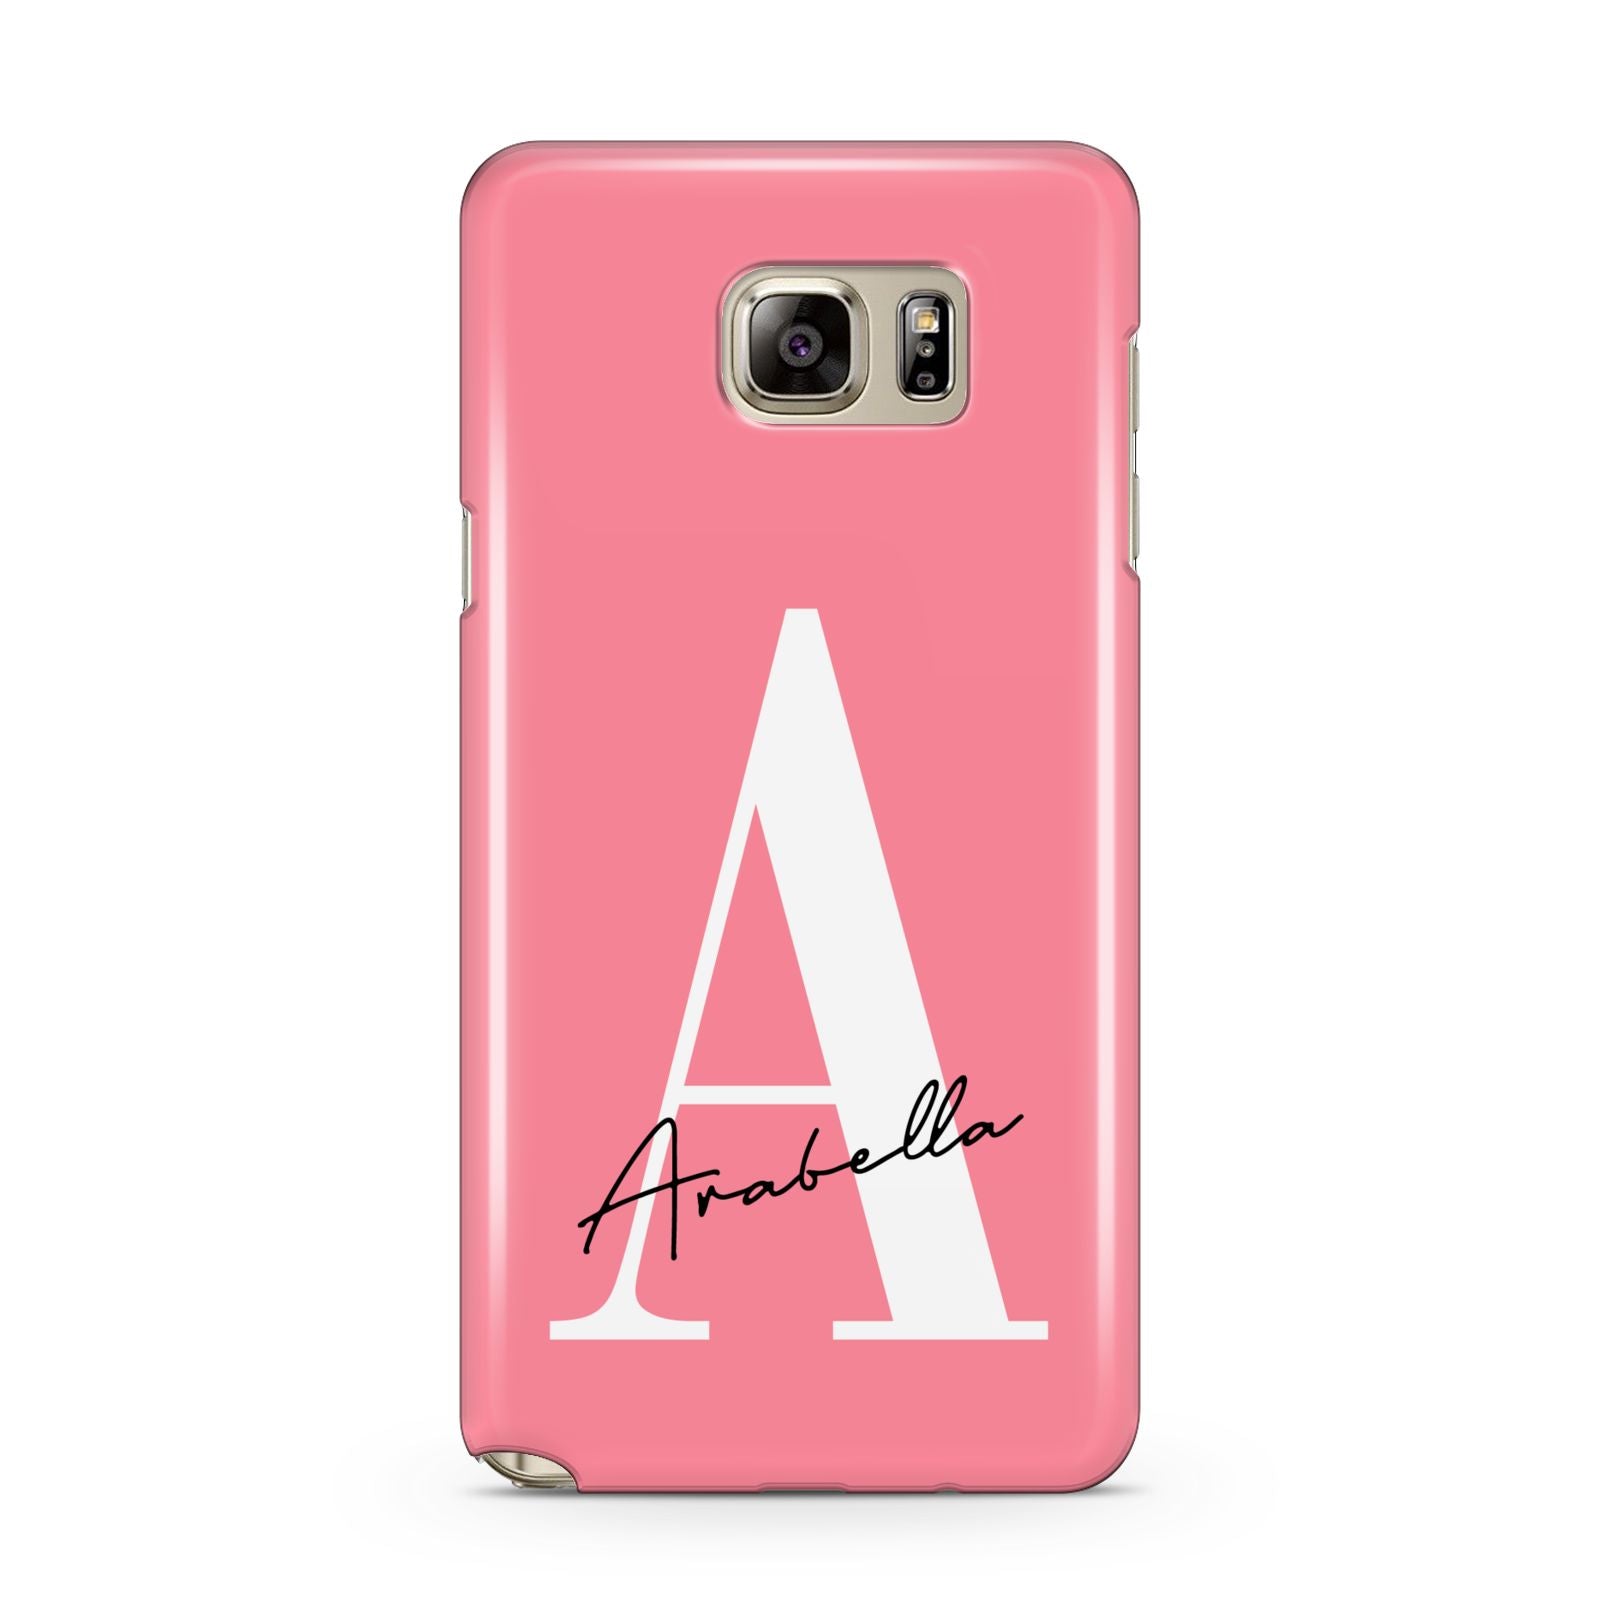 Personalised Pink White Initial Samsung Galaxy Note 5 Case